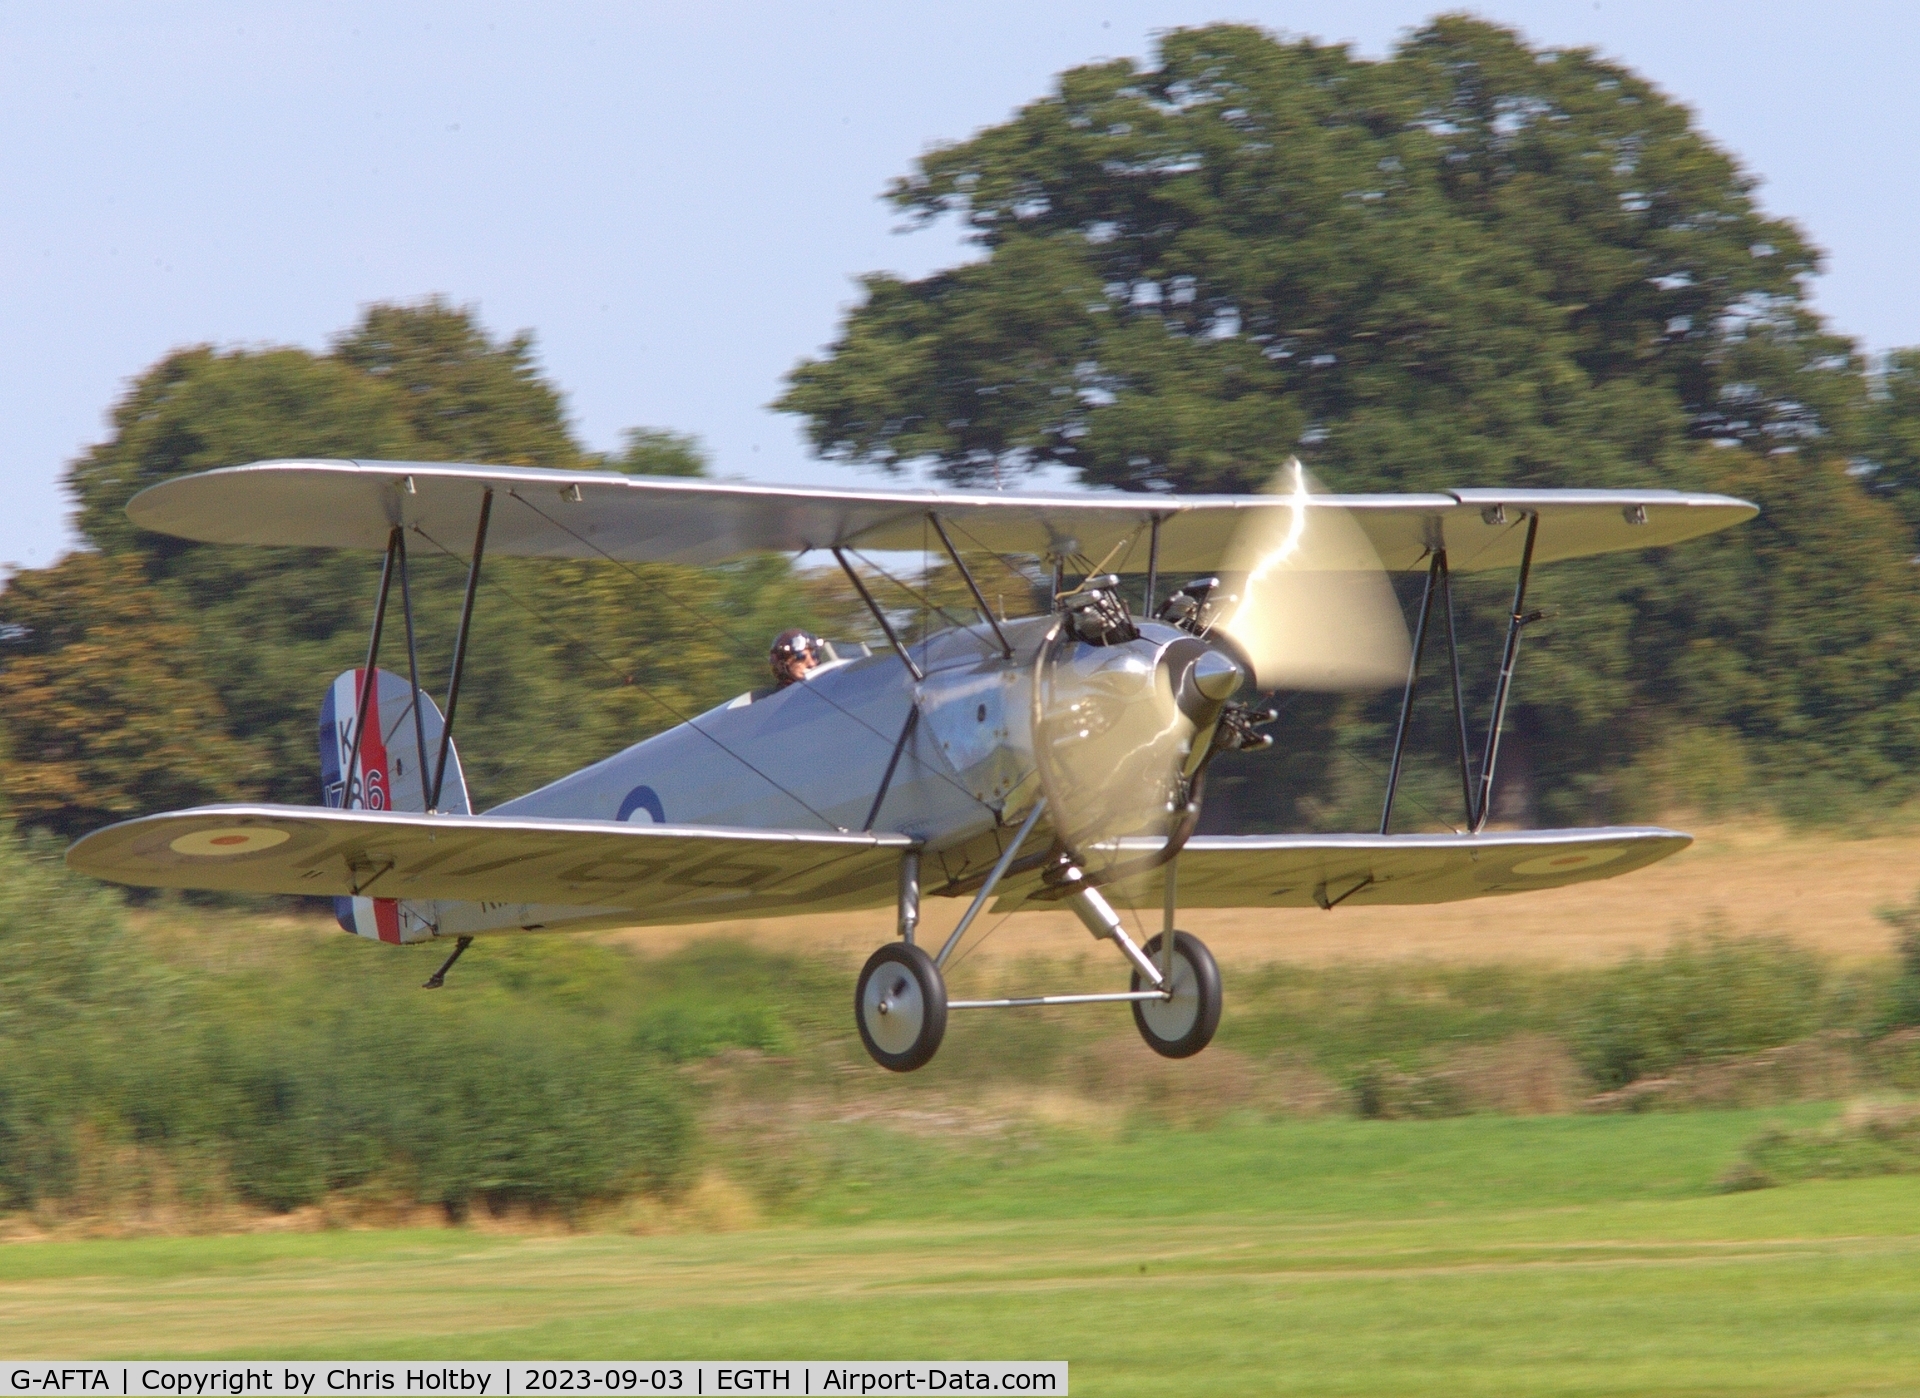 G-AFTA, 1931 Hawker Tomtit Mk1 C/N 30380, Hawker Tomtit taking off from Old Warden at the Vintage Airshow 2023